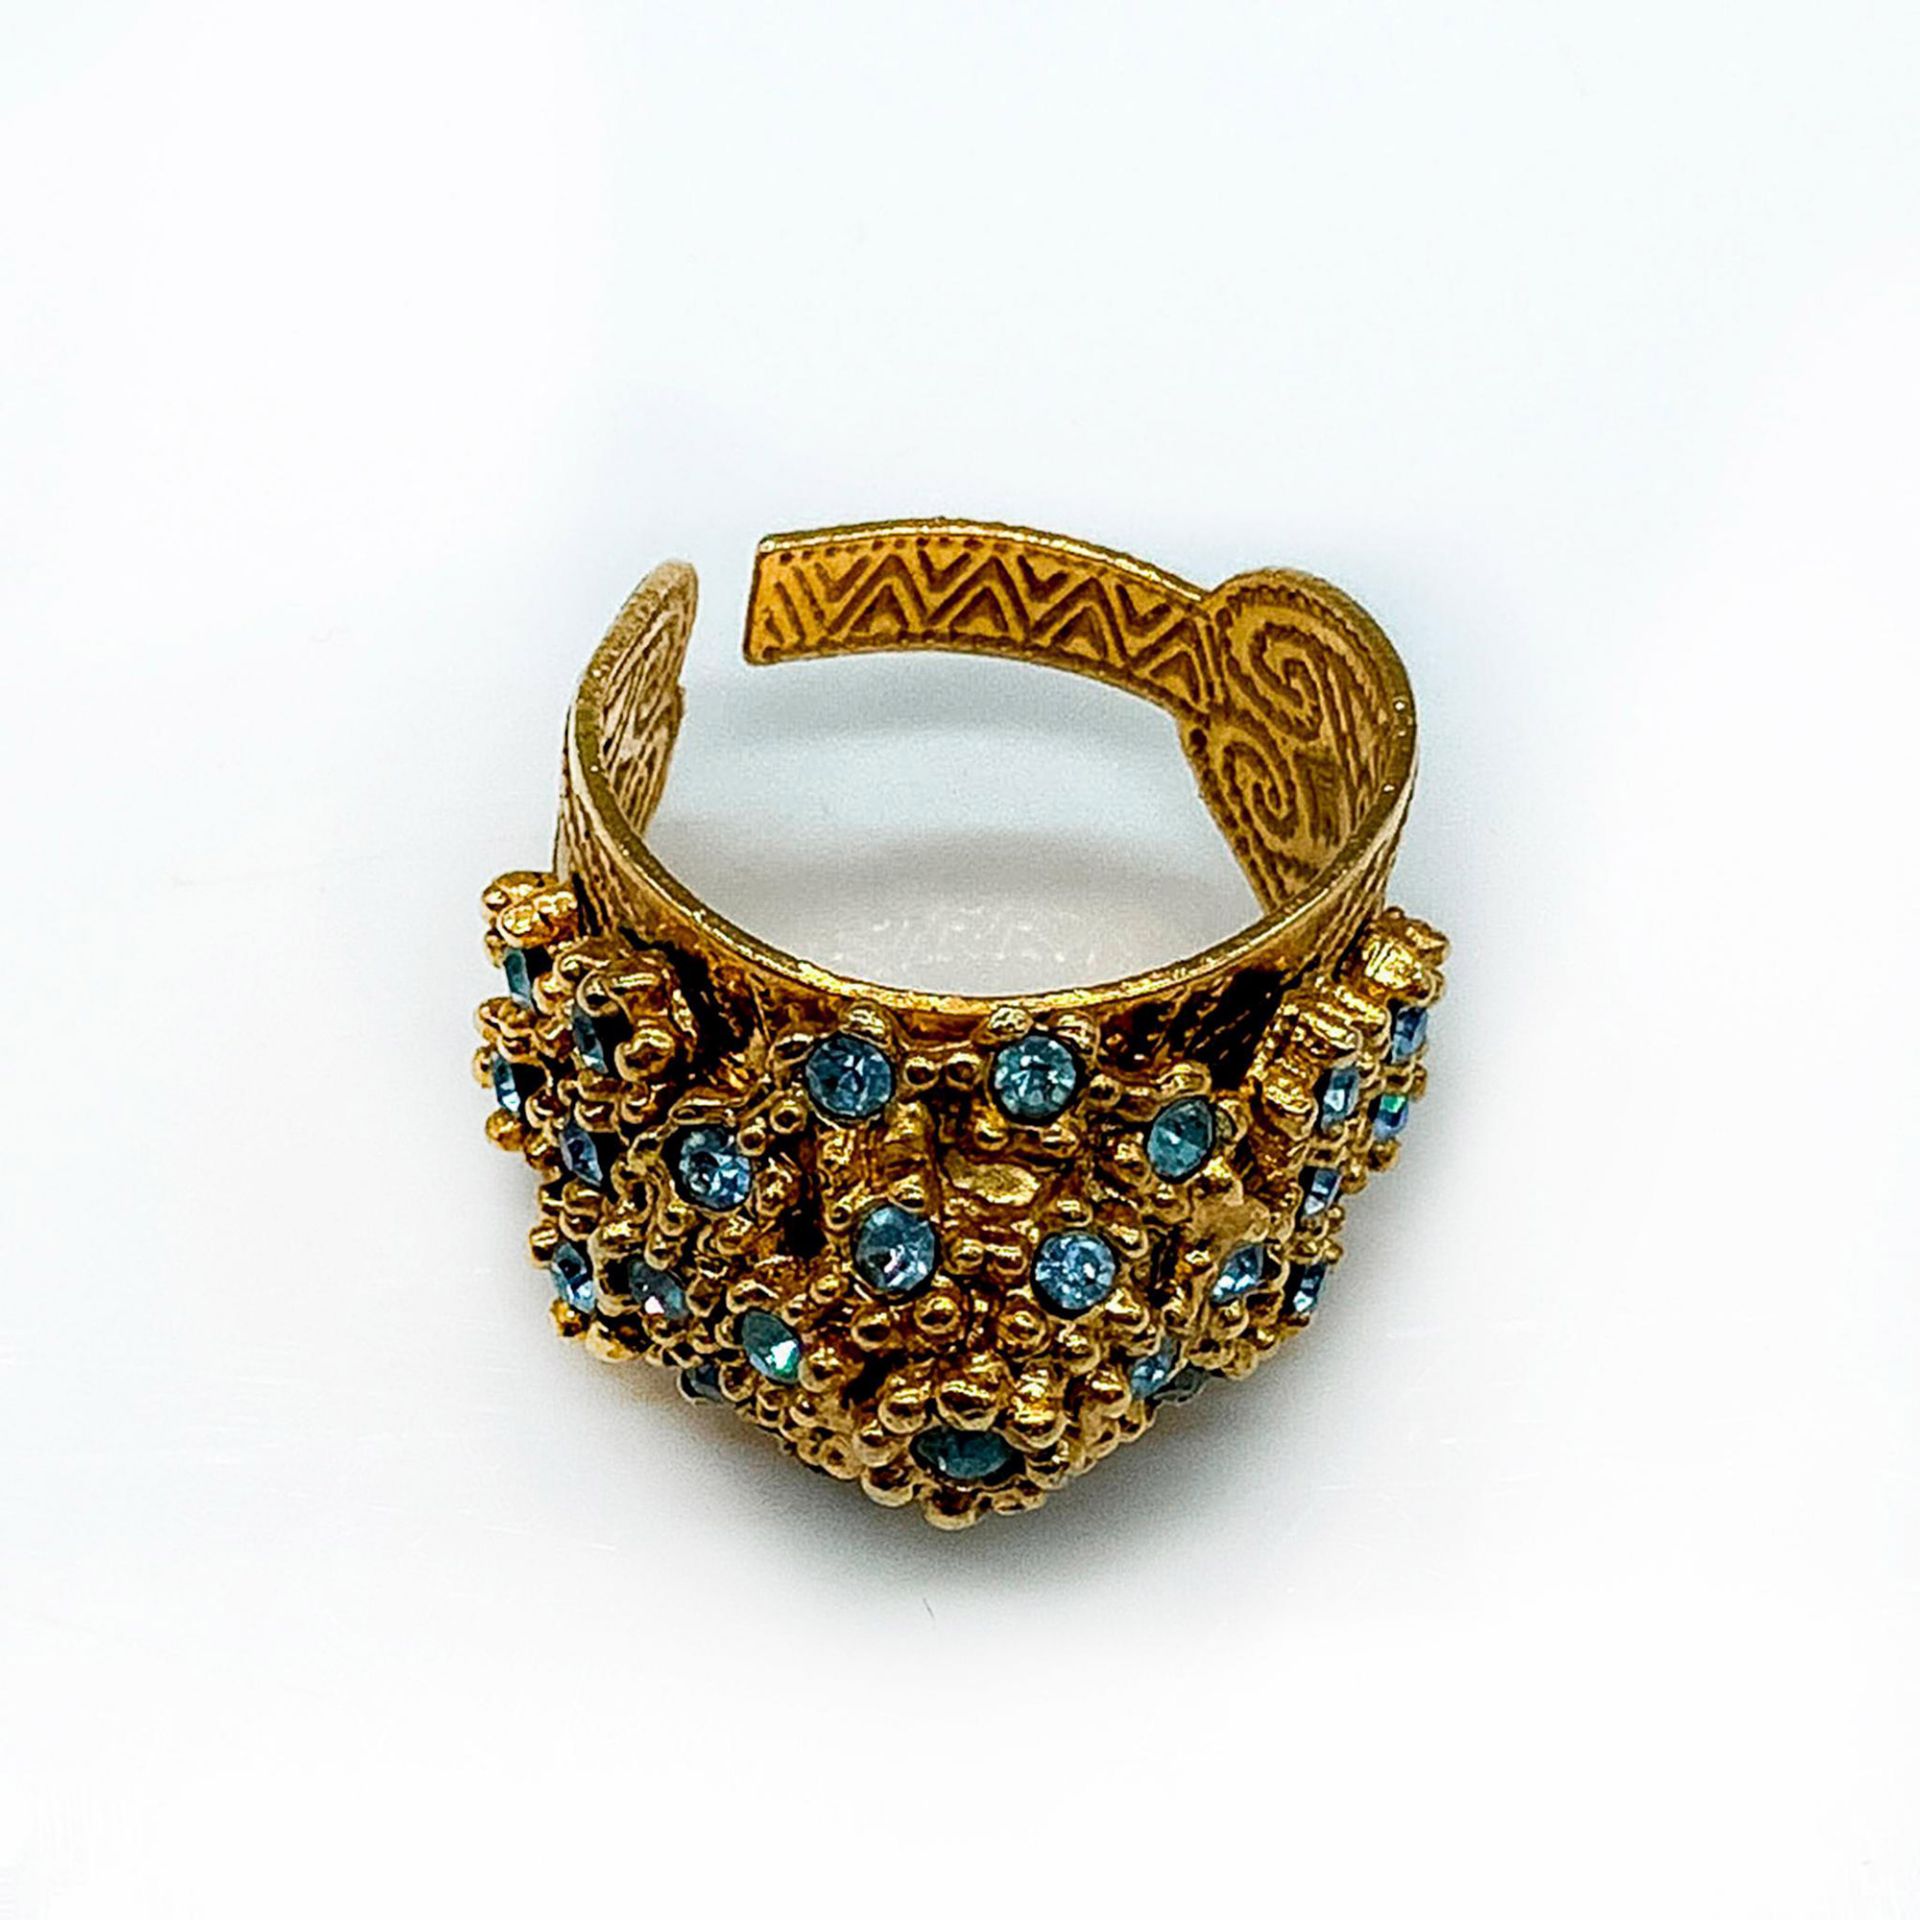 Ornate Gold Tone Ring with Blue Rhinestones - Image 2 of 2